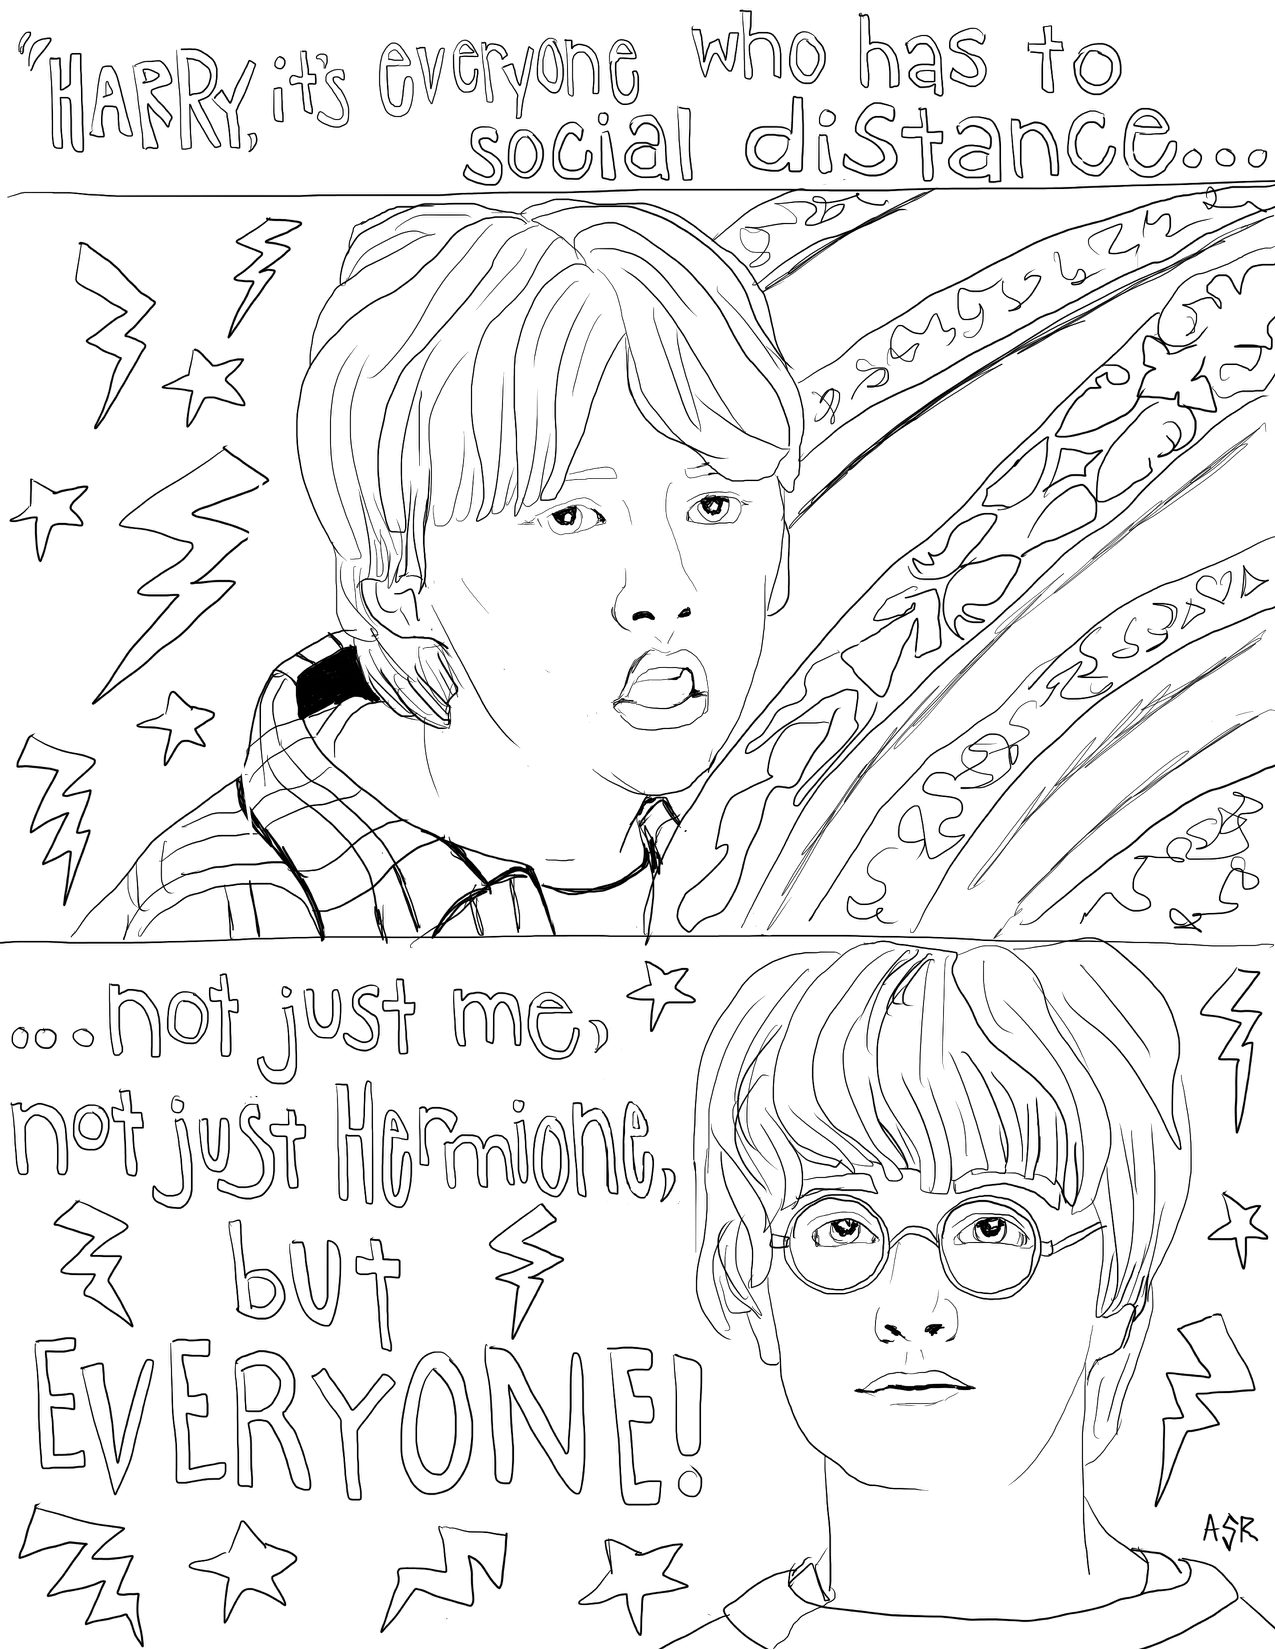 harrypotter_coloringpage.png